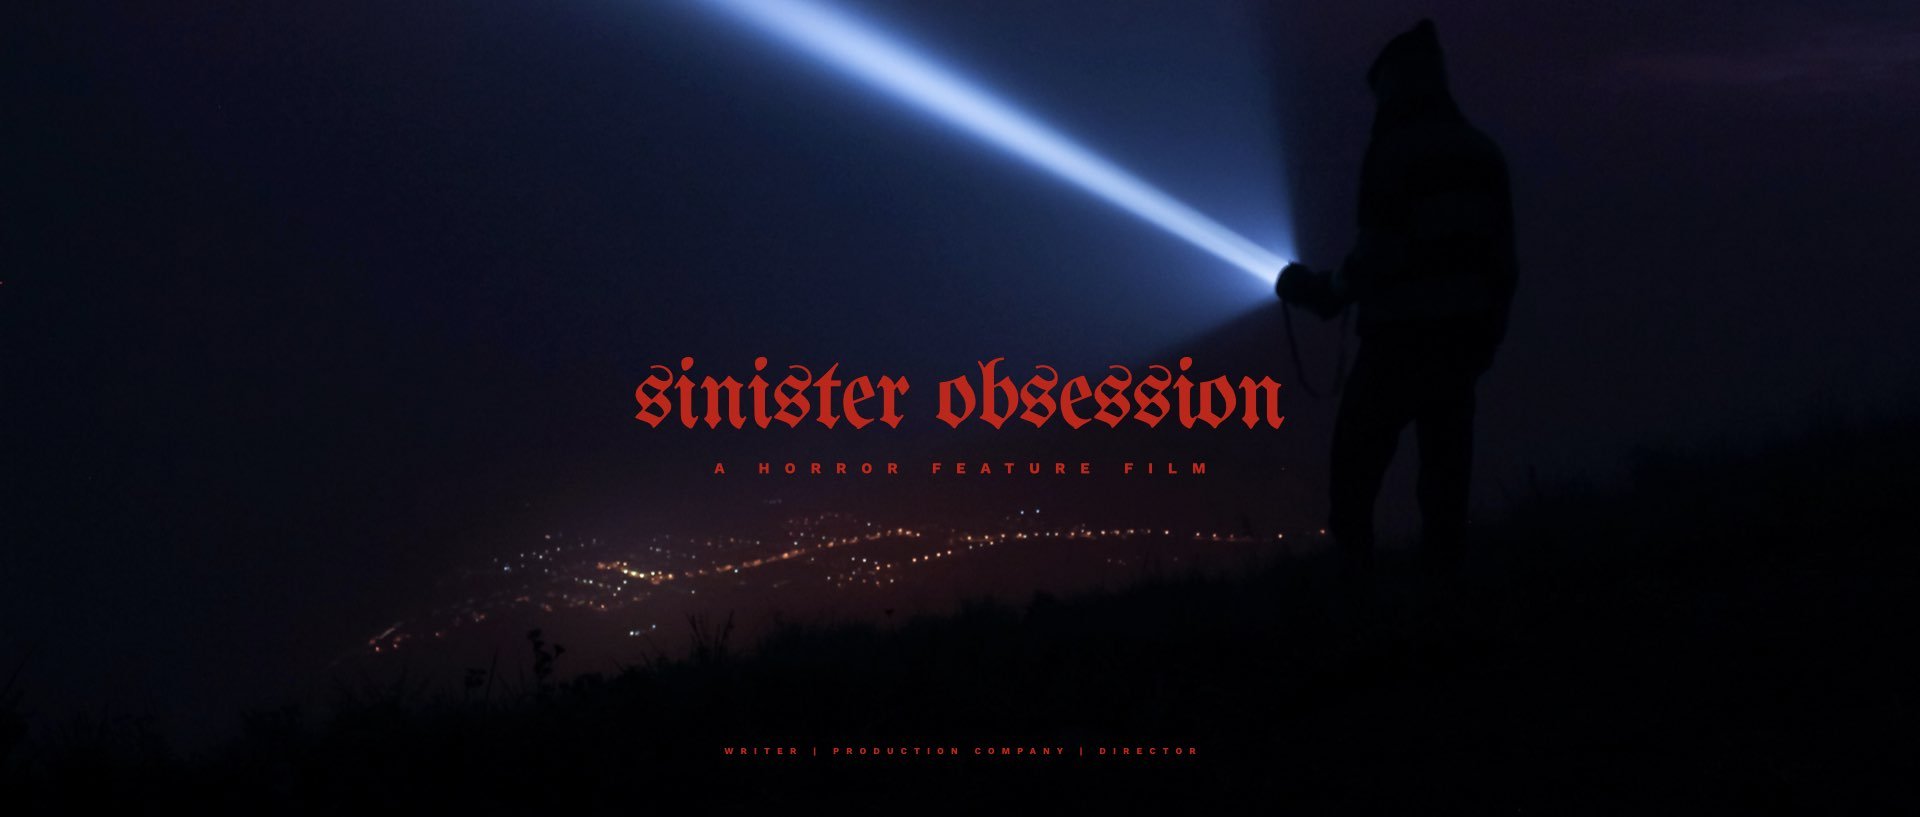 ‎Film Pitch Deck Template - Sinister Obsession.‎001.jpeg